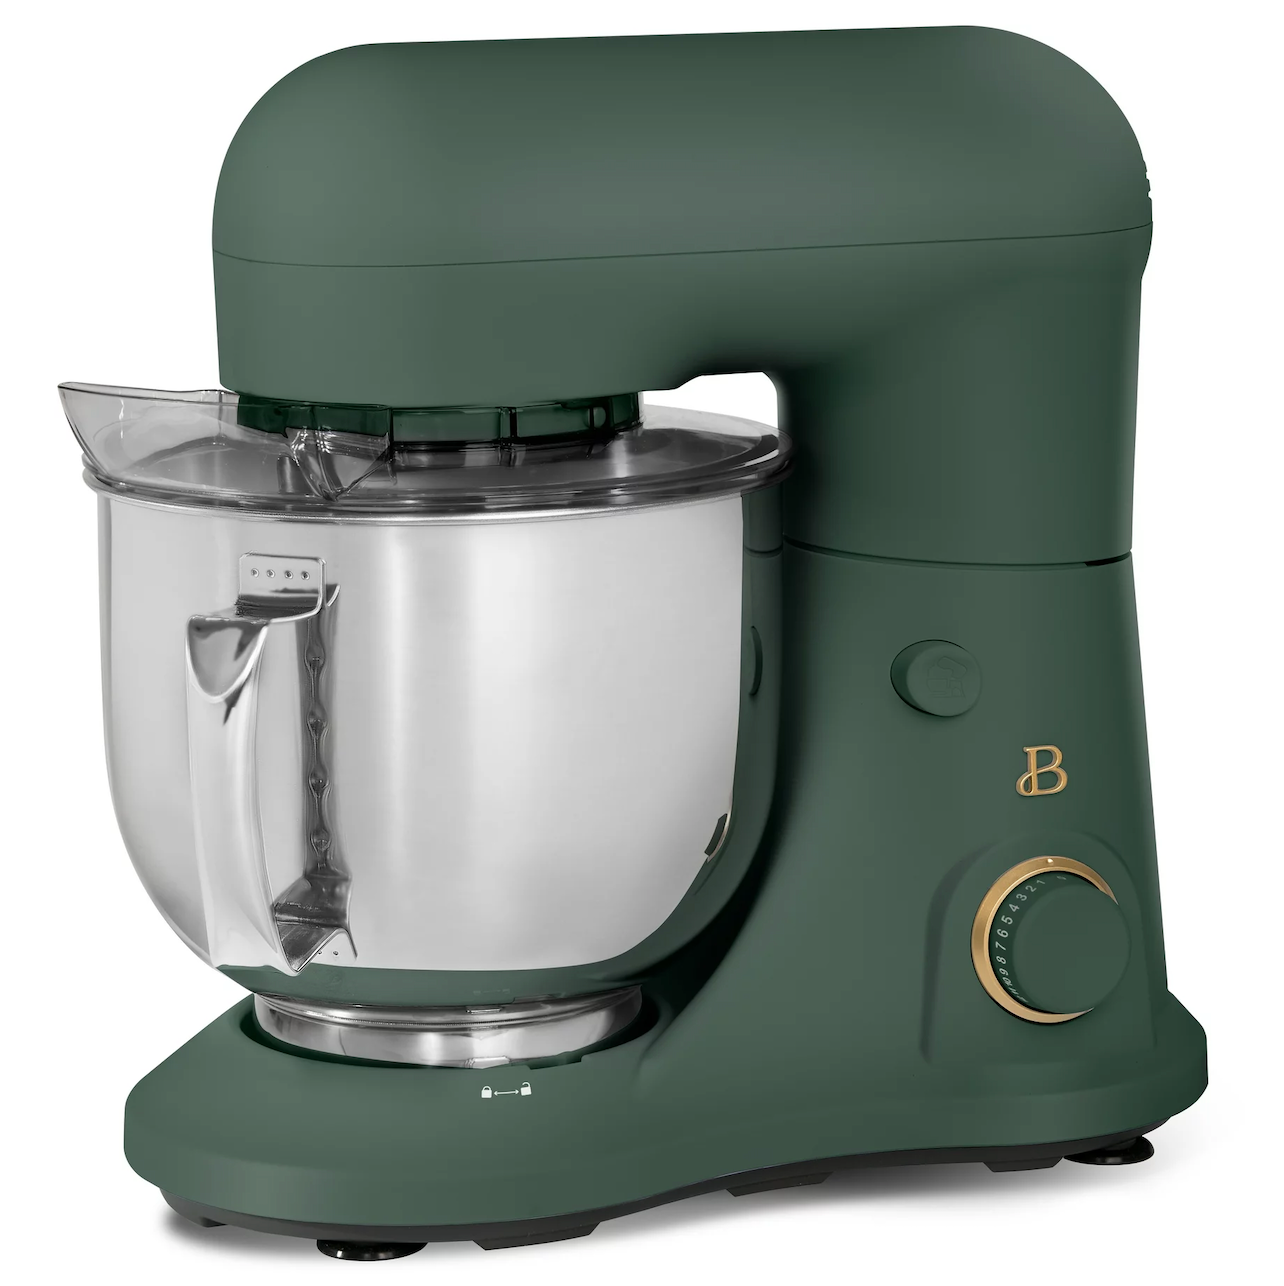 Shop Drew Barrymore's $129 New Stand Mixer—Mother's Day Gifts 2022